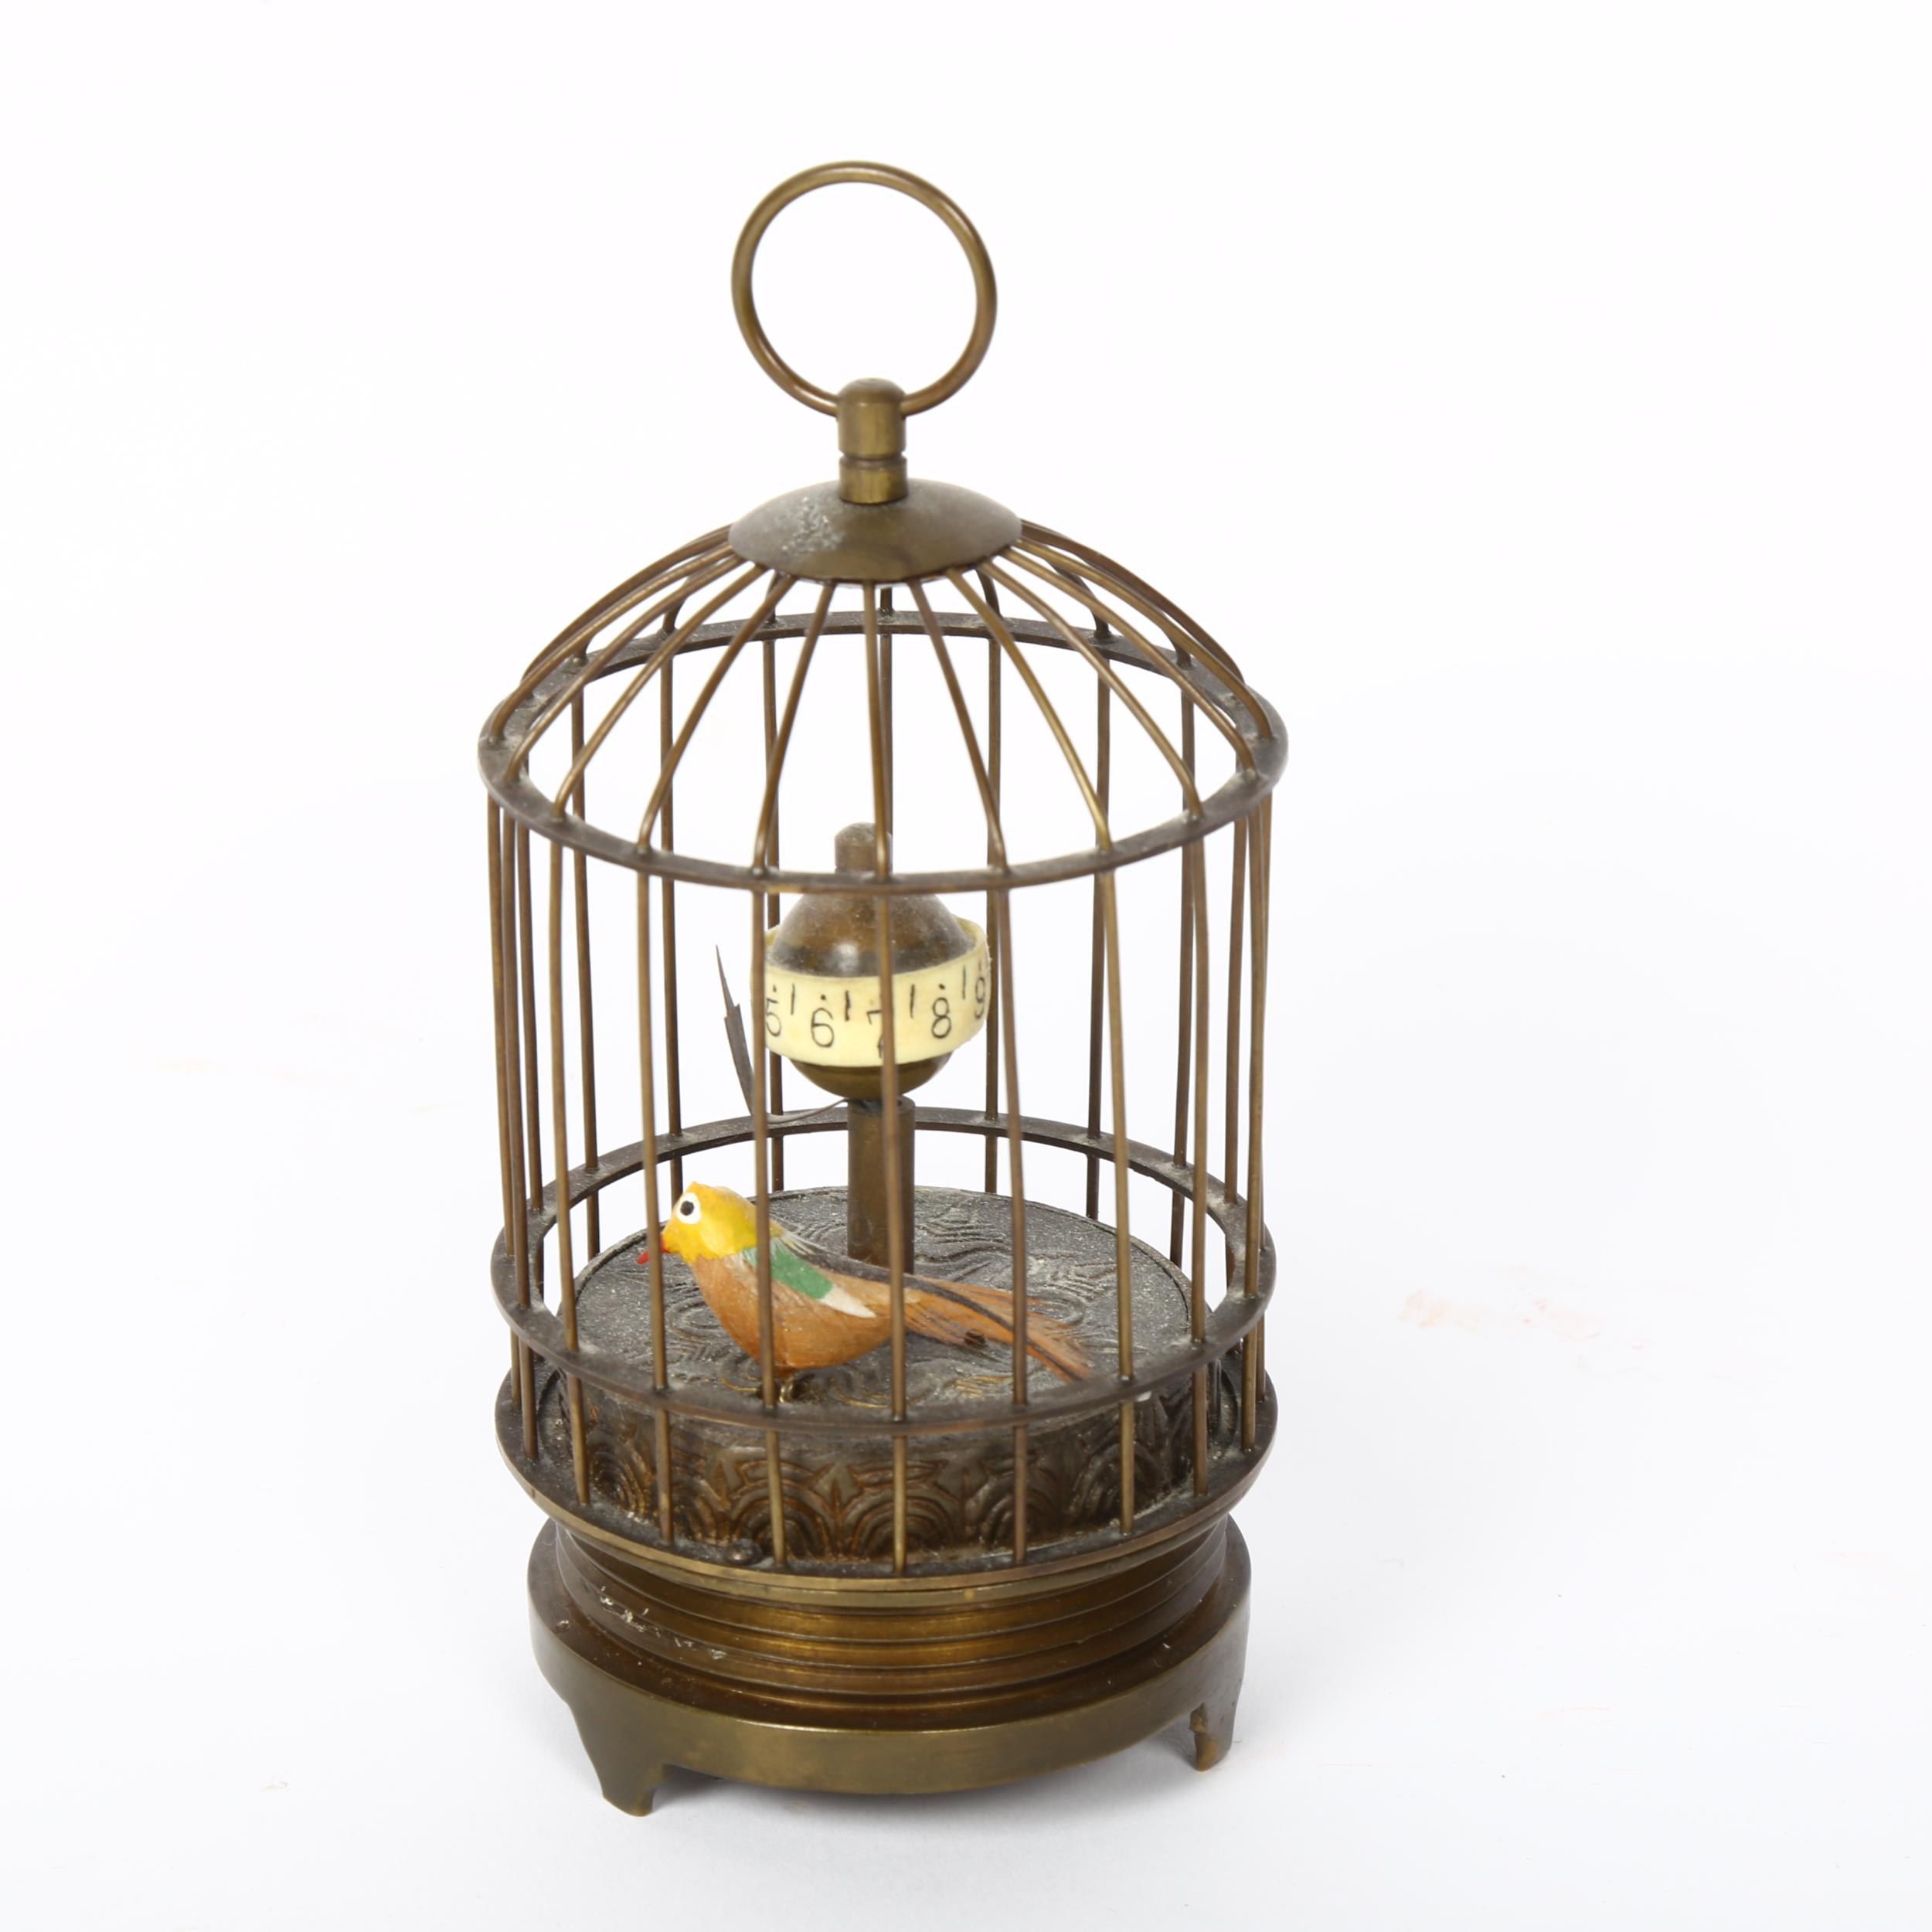 A small reproduction brass bird cage automaton clock, height 12cm, not currently working